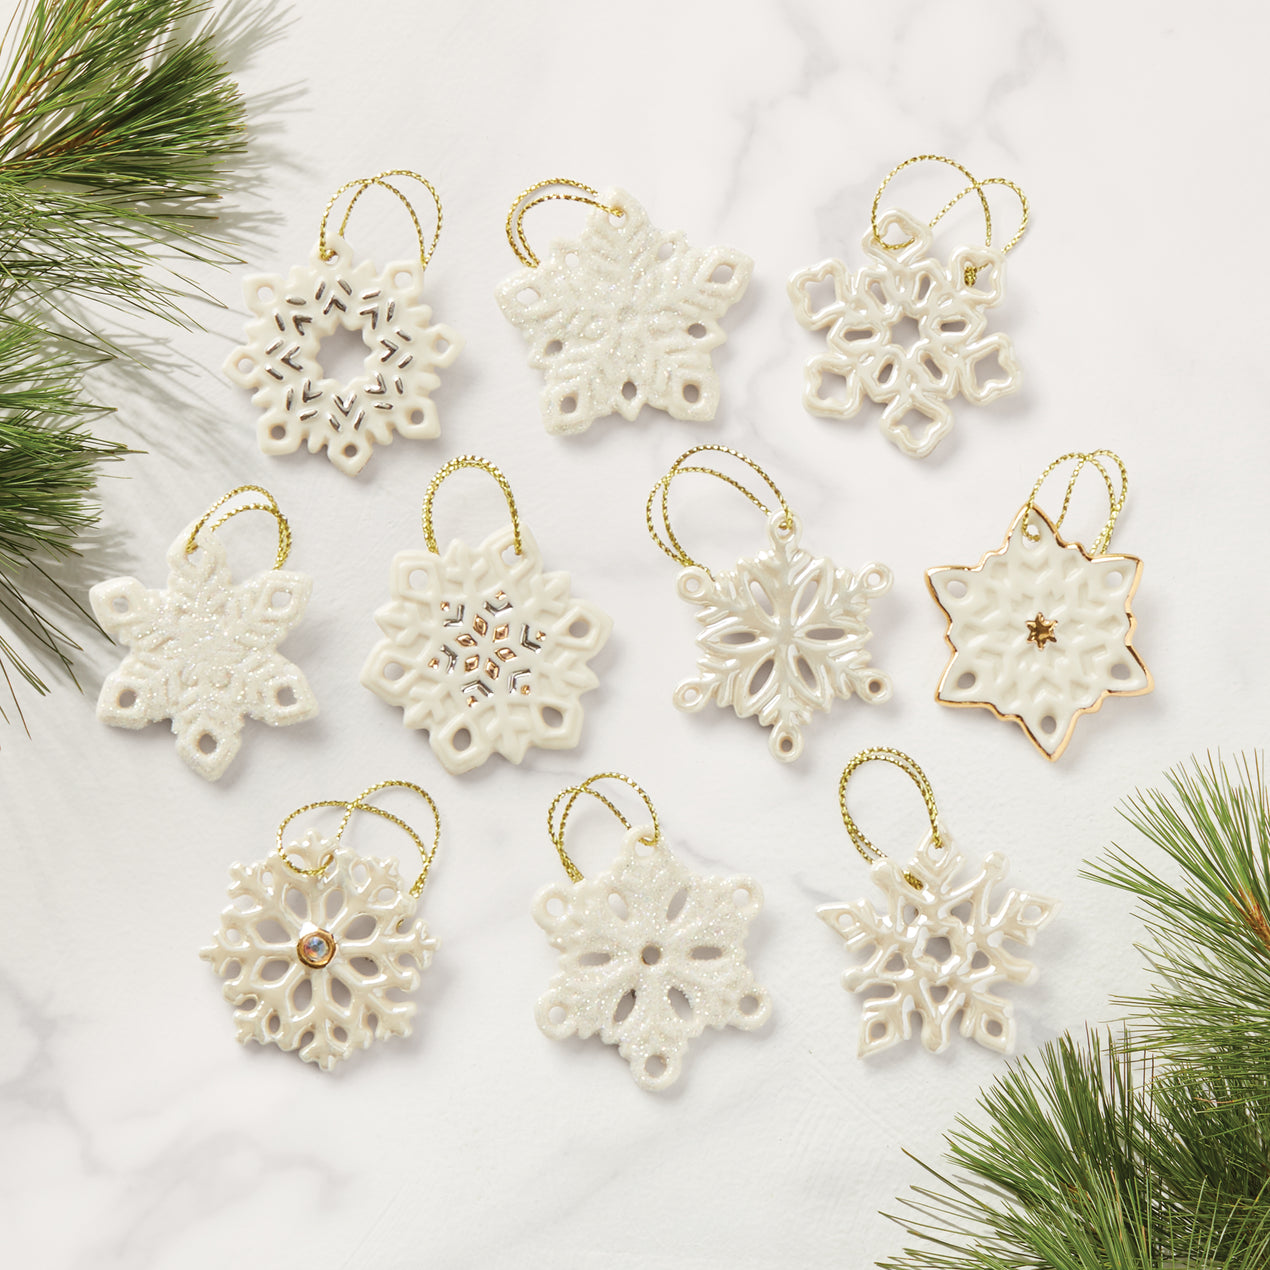 Small White Acrylic Snowflake Ornaments With Gift Box, Set of 6 